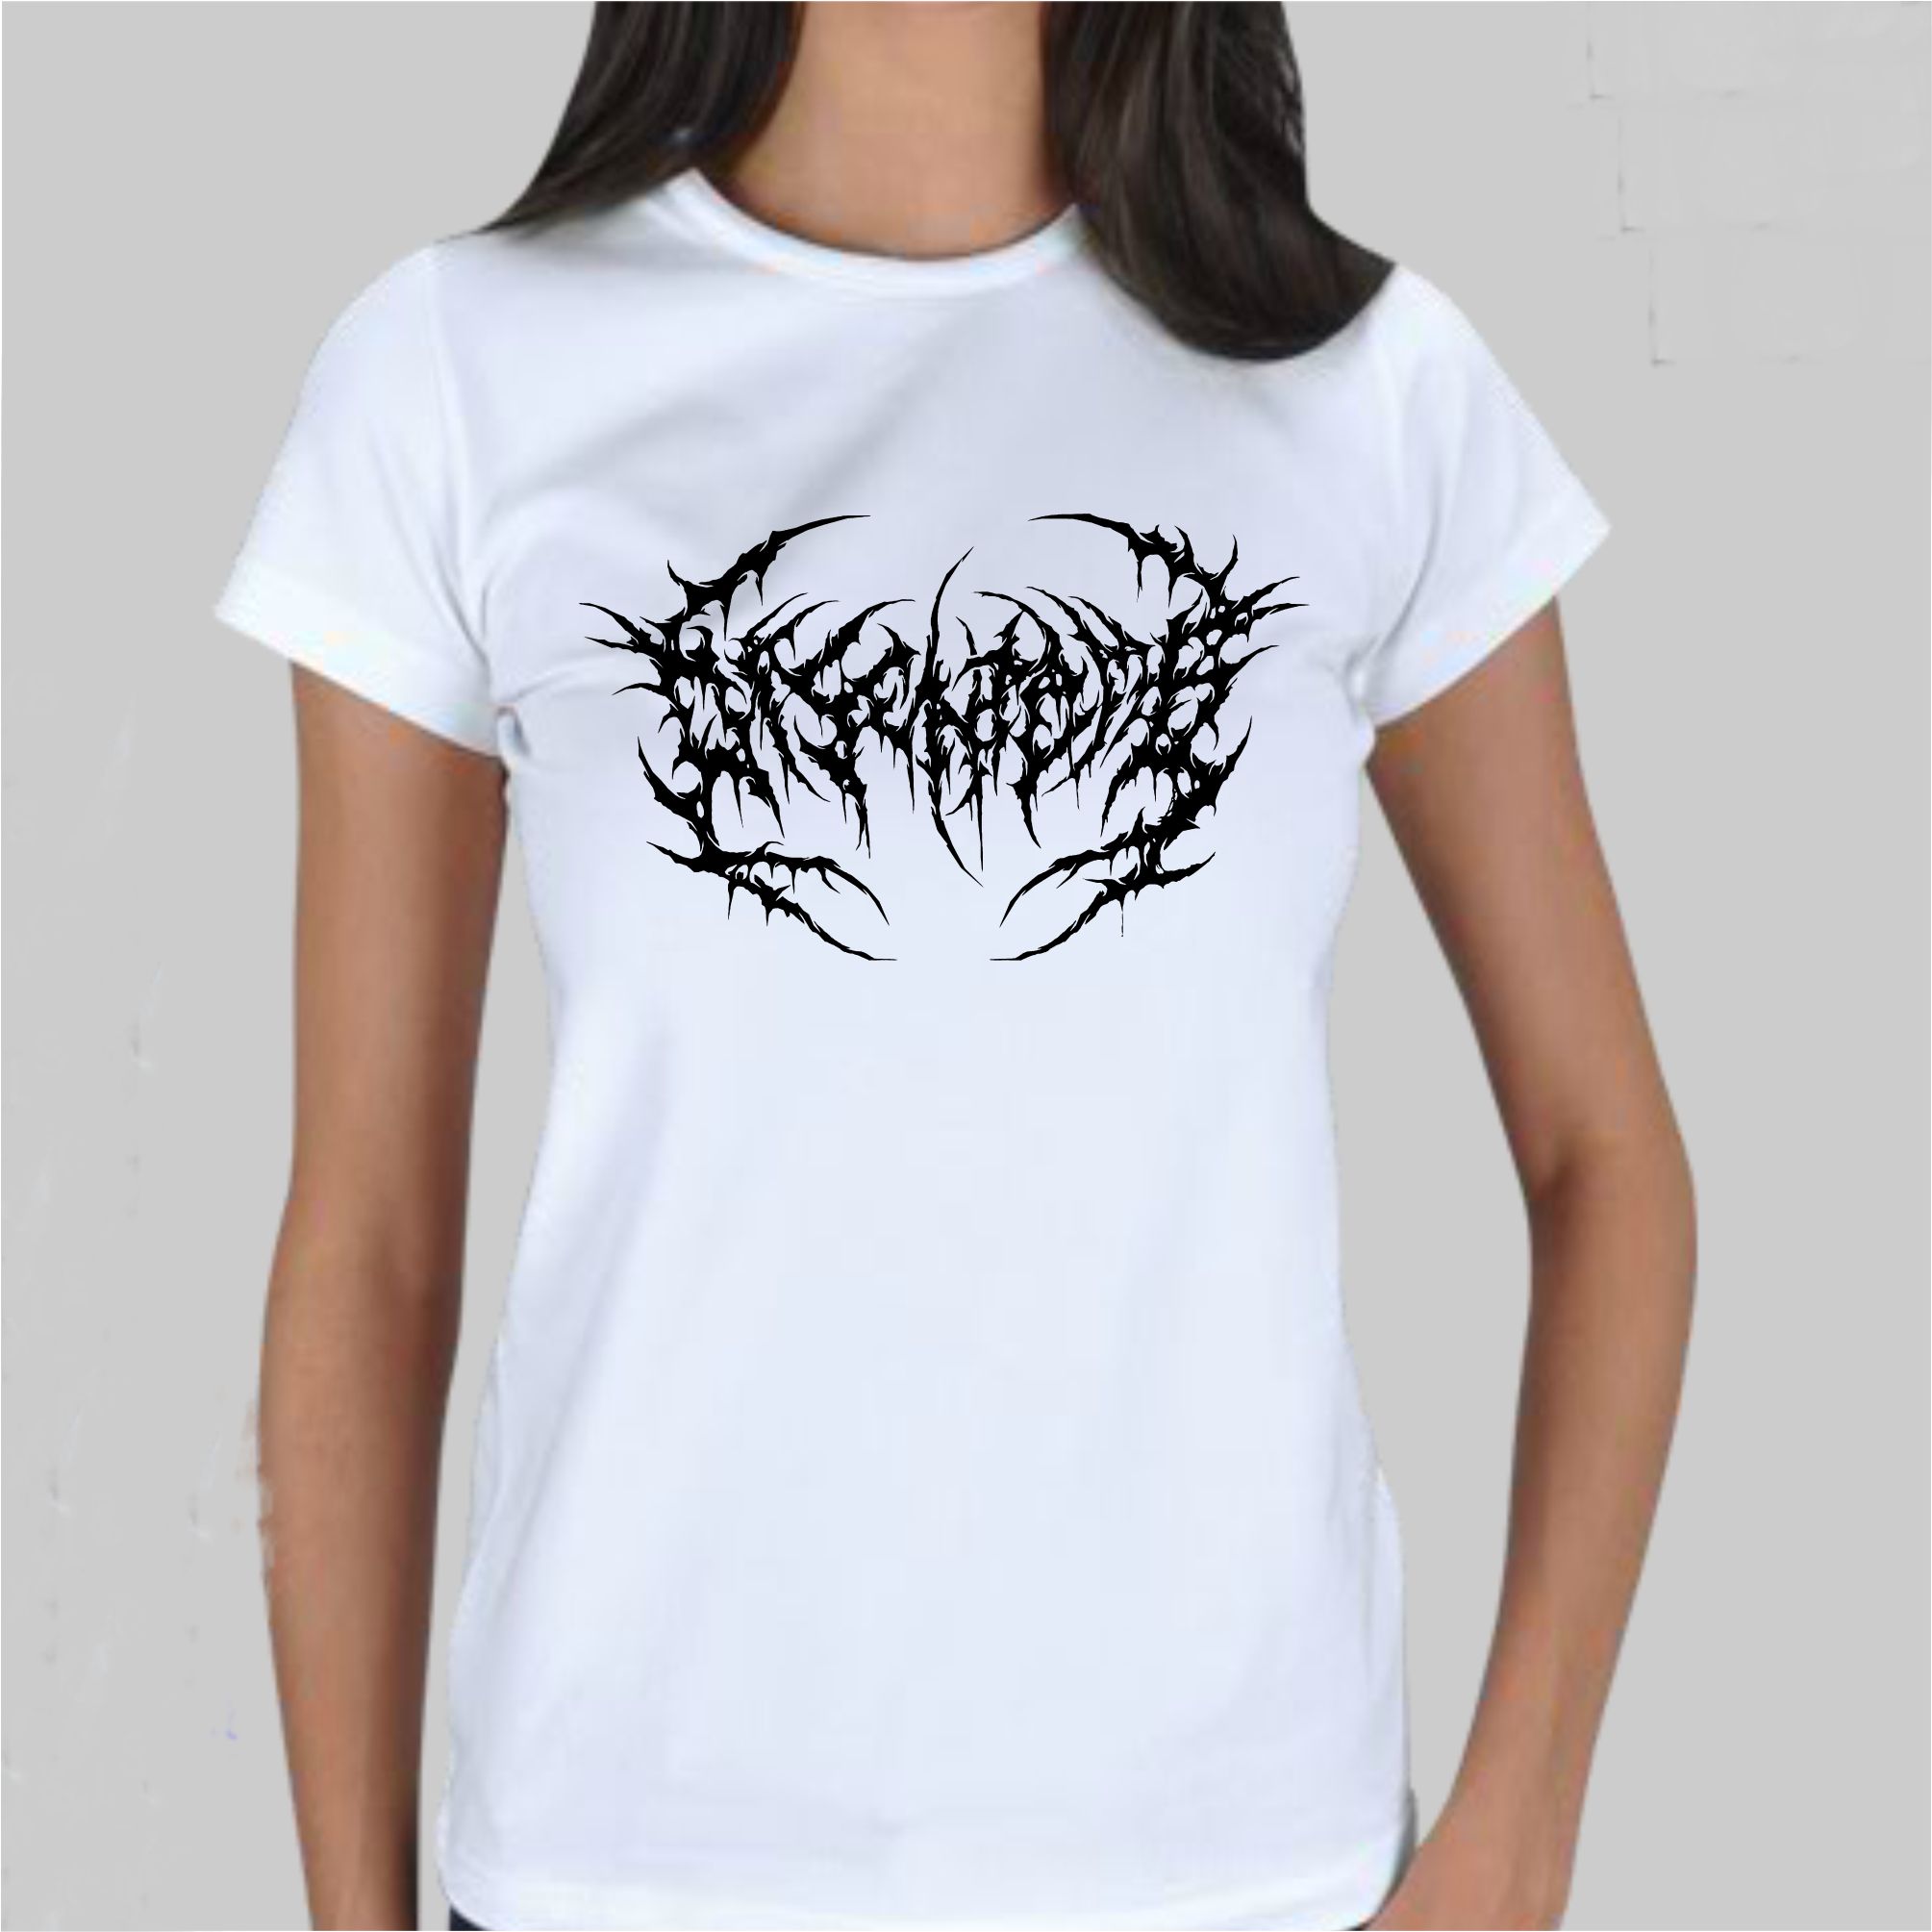 Disentomb Logo White girlie t-shirt – Metal & Rock T-shirts and Accessories